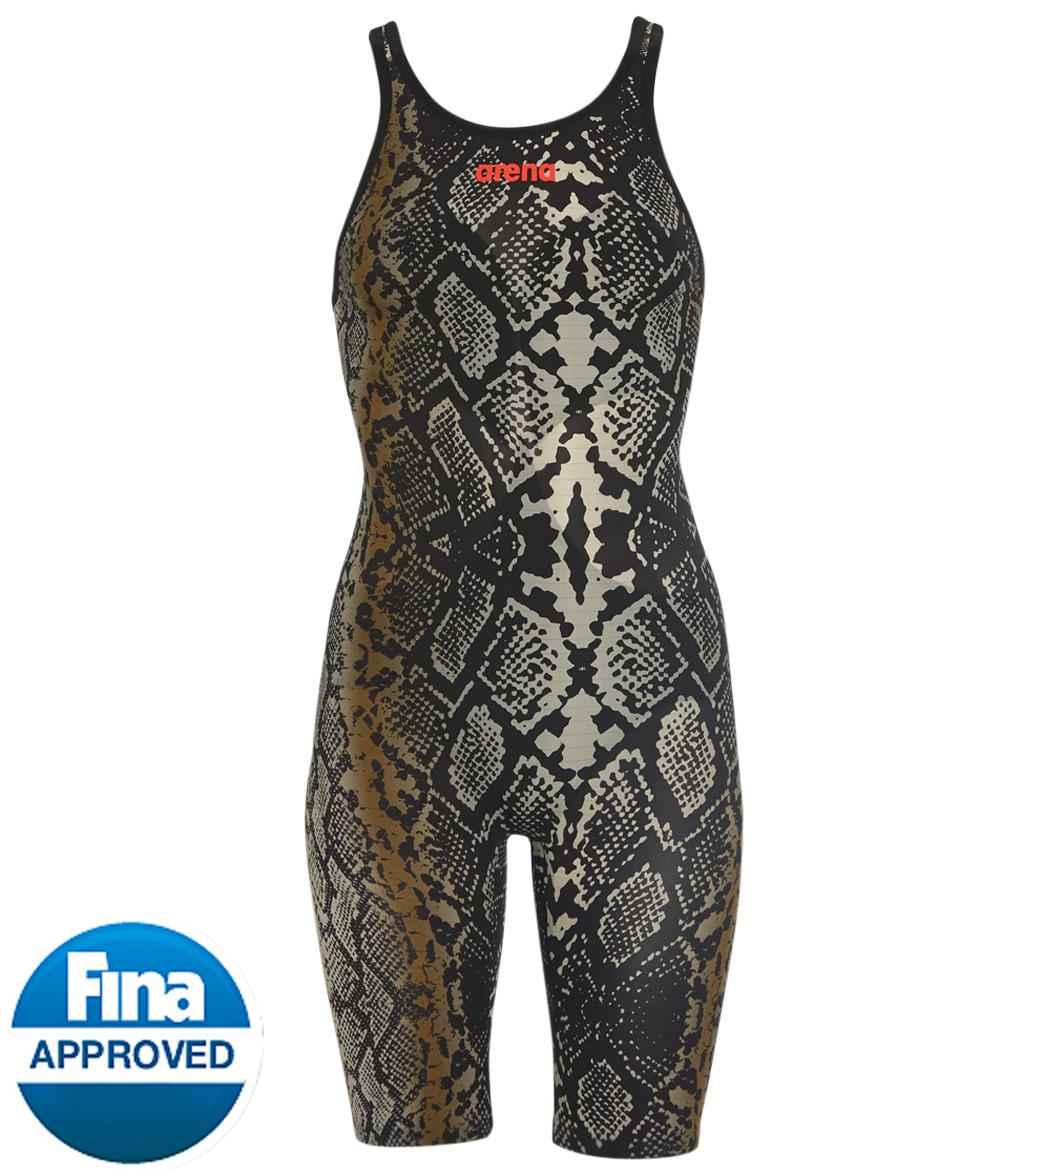 Arena Women's Limited Edition Powerskin Carbon Air2 Full Body Open Back Tech Suit Swimsuit Python